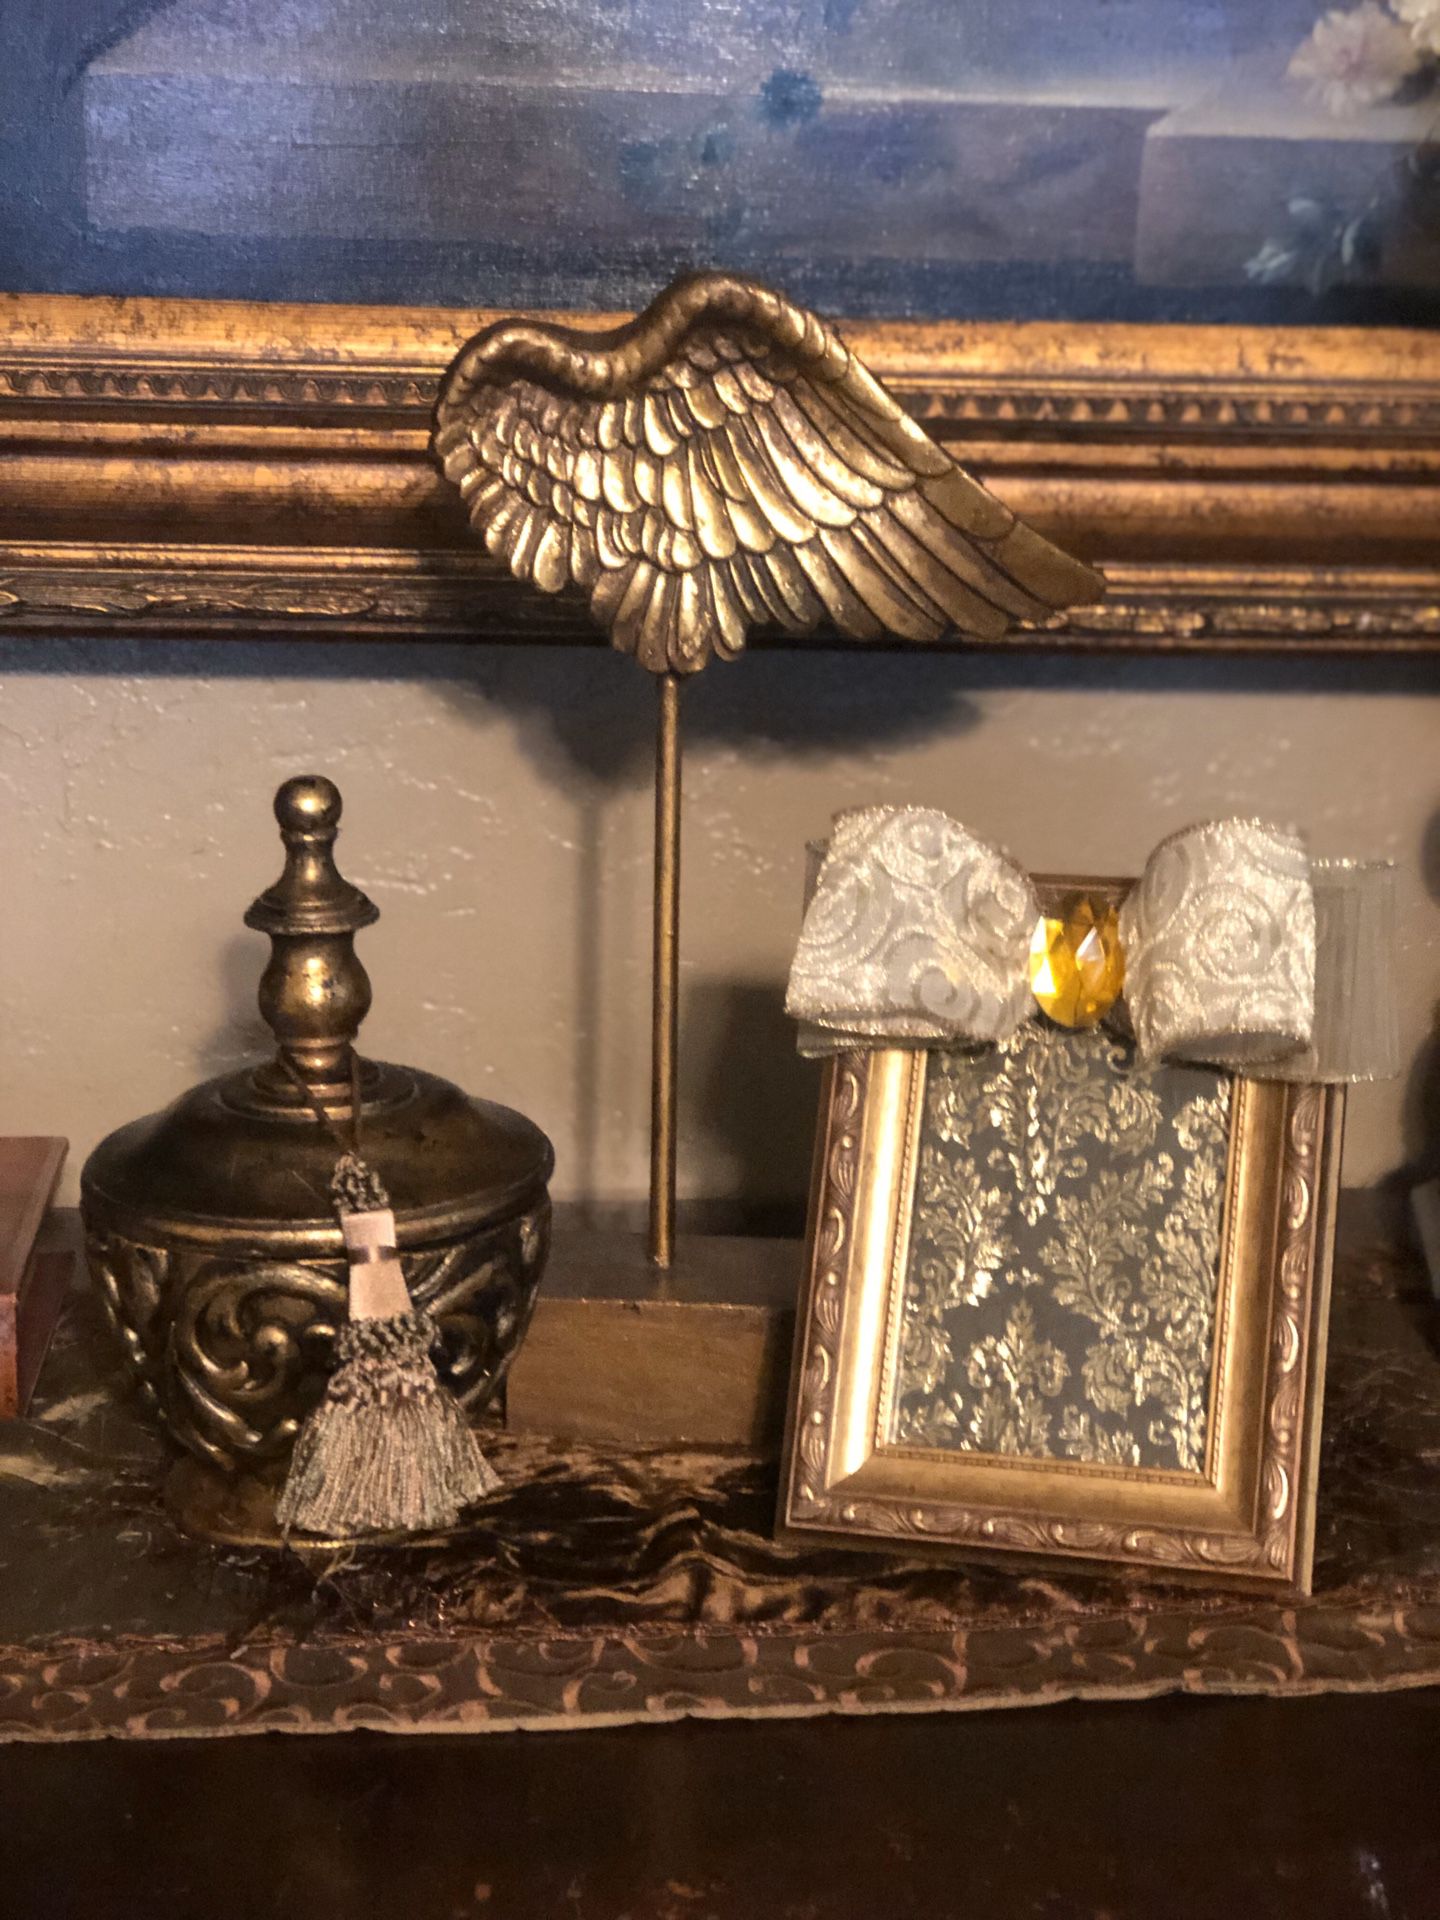 Angel wings and decorative items